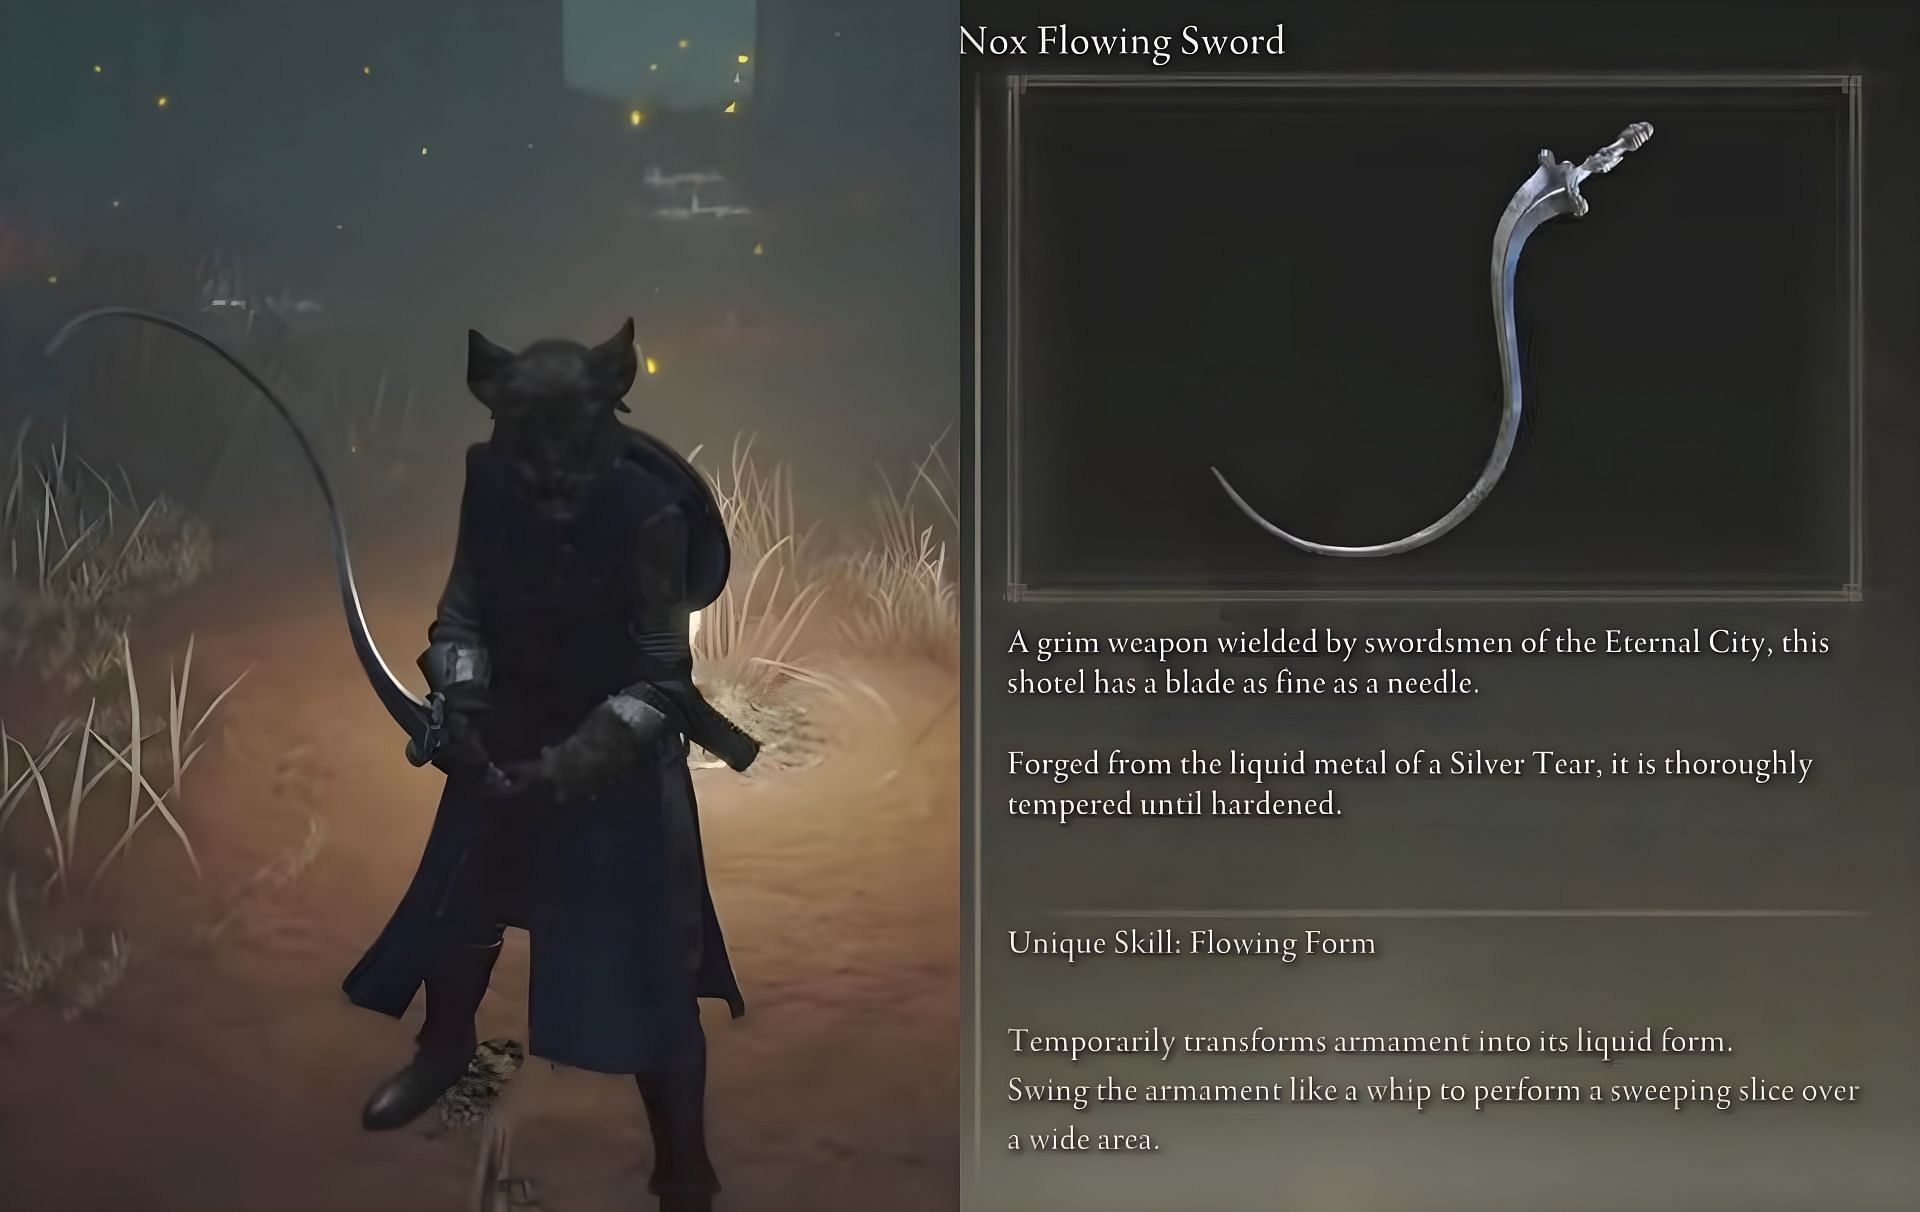 Obtaining the Nox Flowing Sword in Elden Ring (Images via Elden Ring and Fredchuckdave/YouTube))